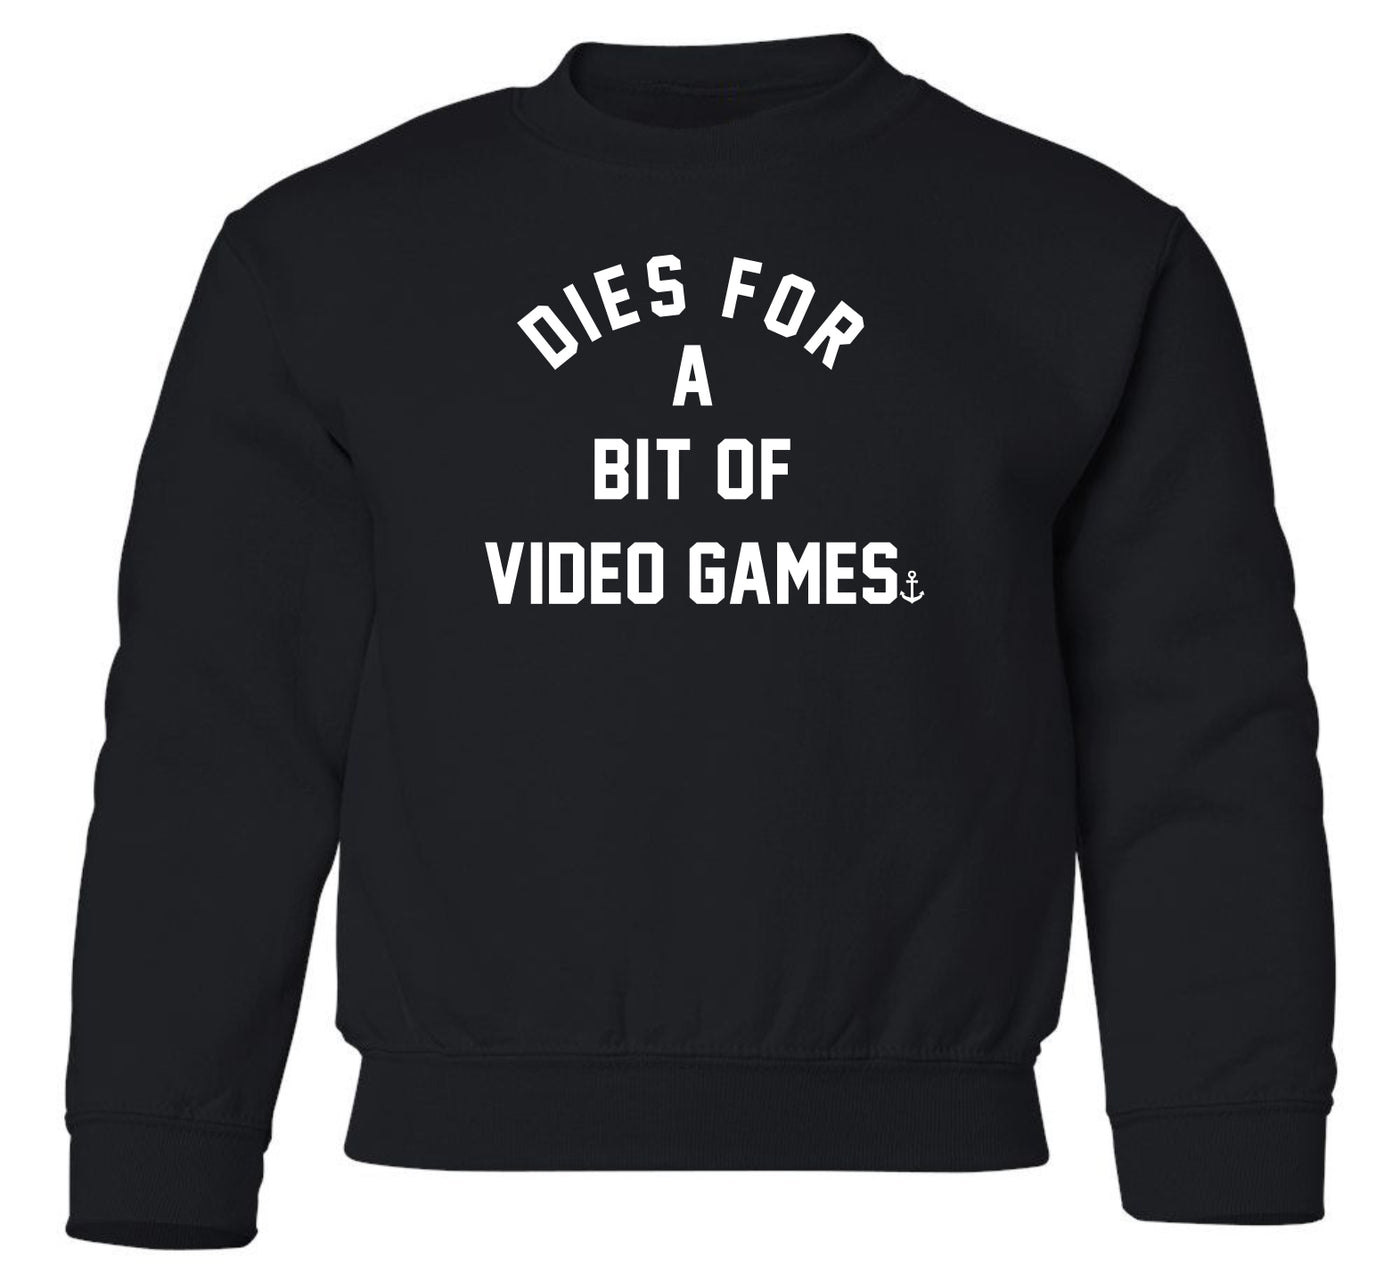 "Dies For A Bit Of Video Games" Toddler/Youth Crewneck Sweatshirt